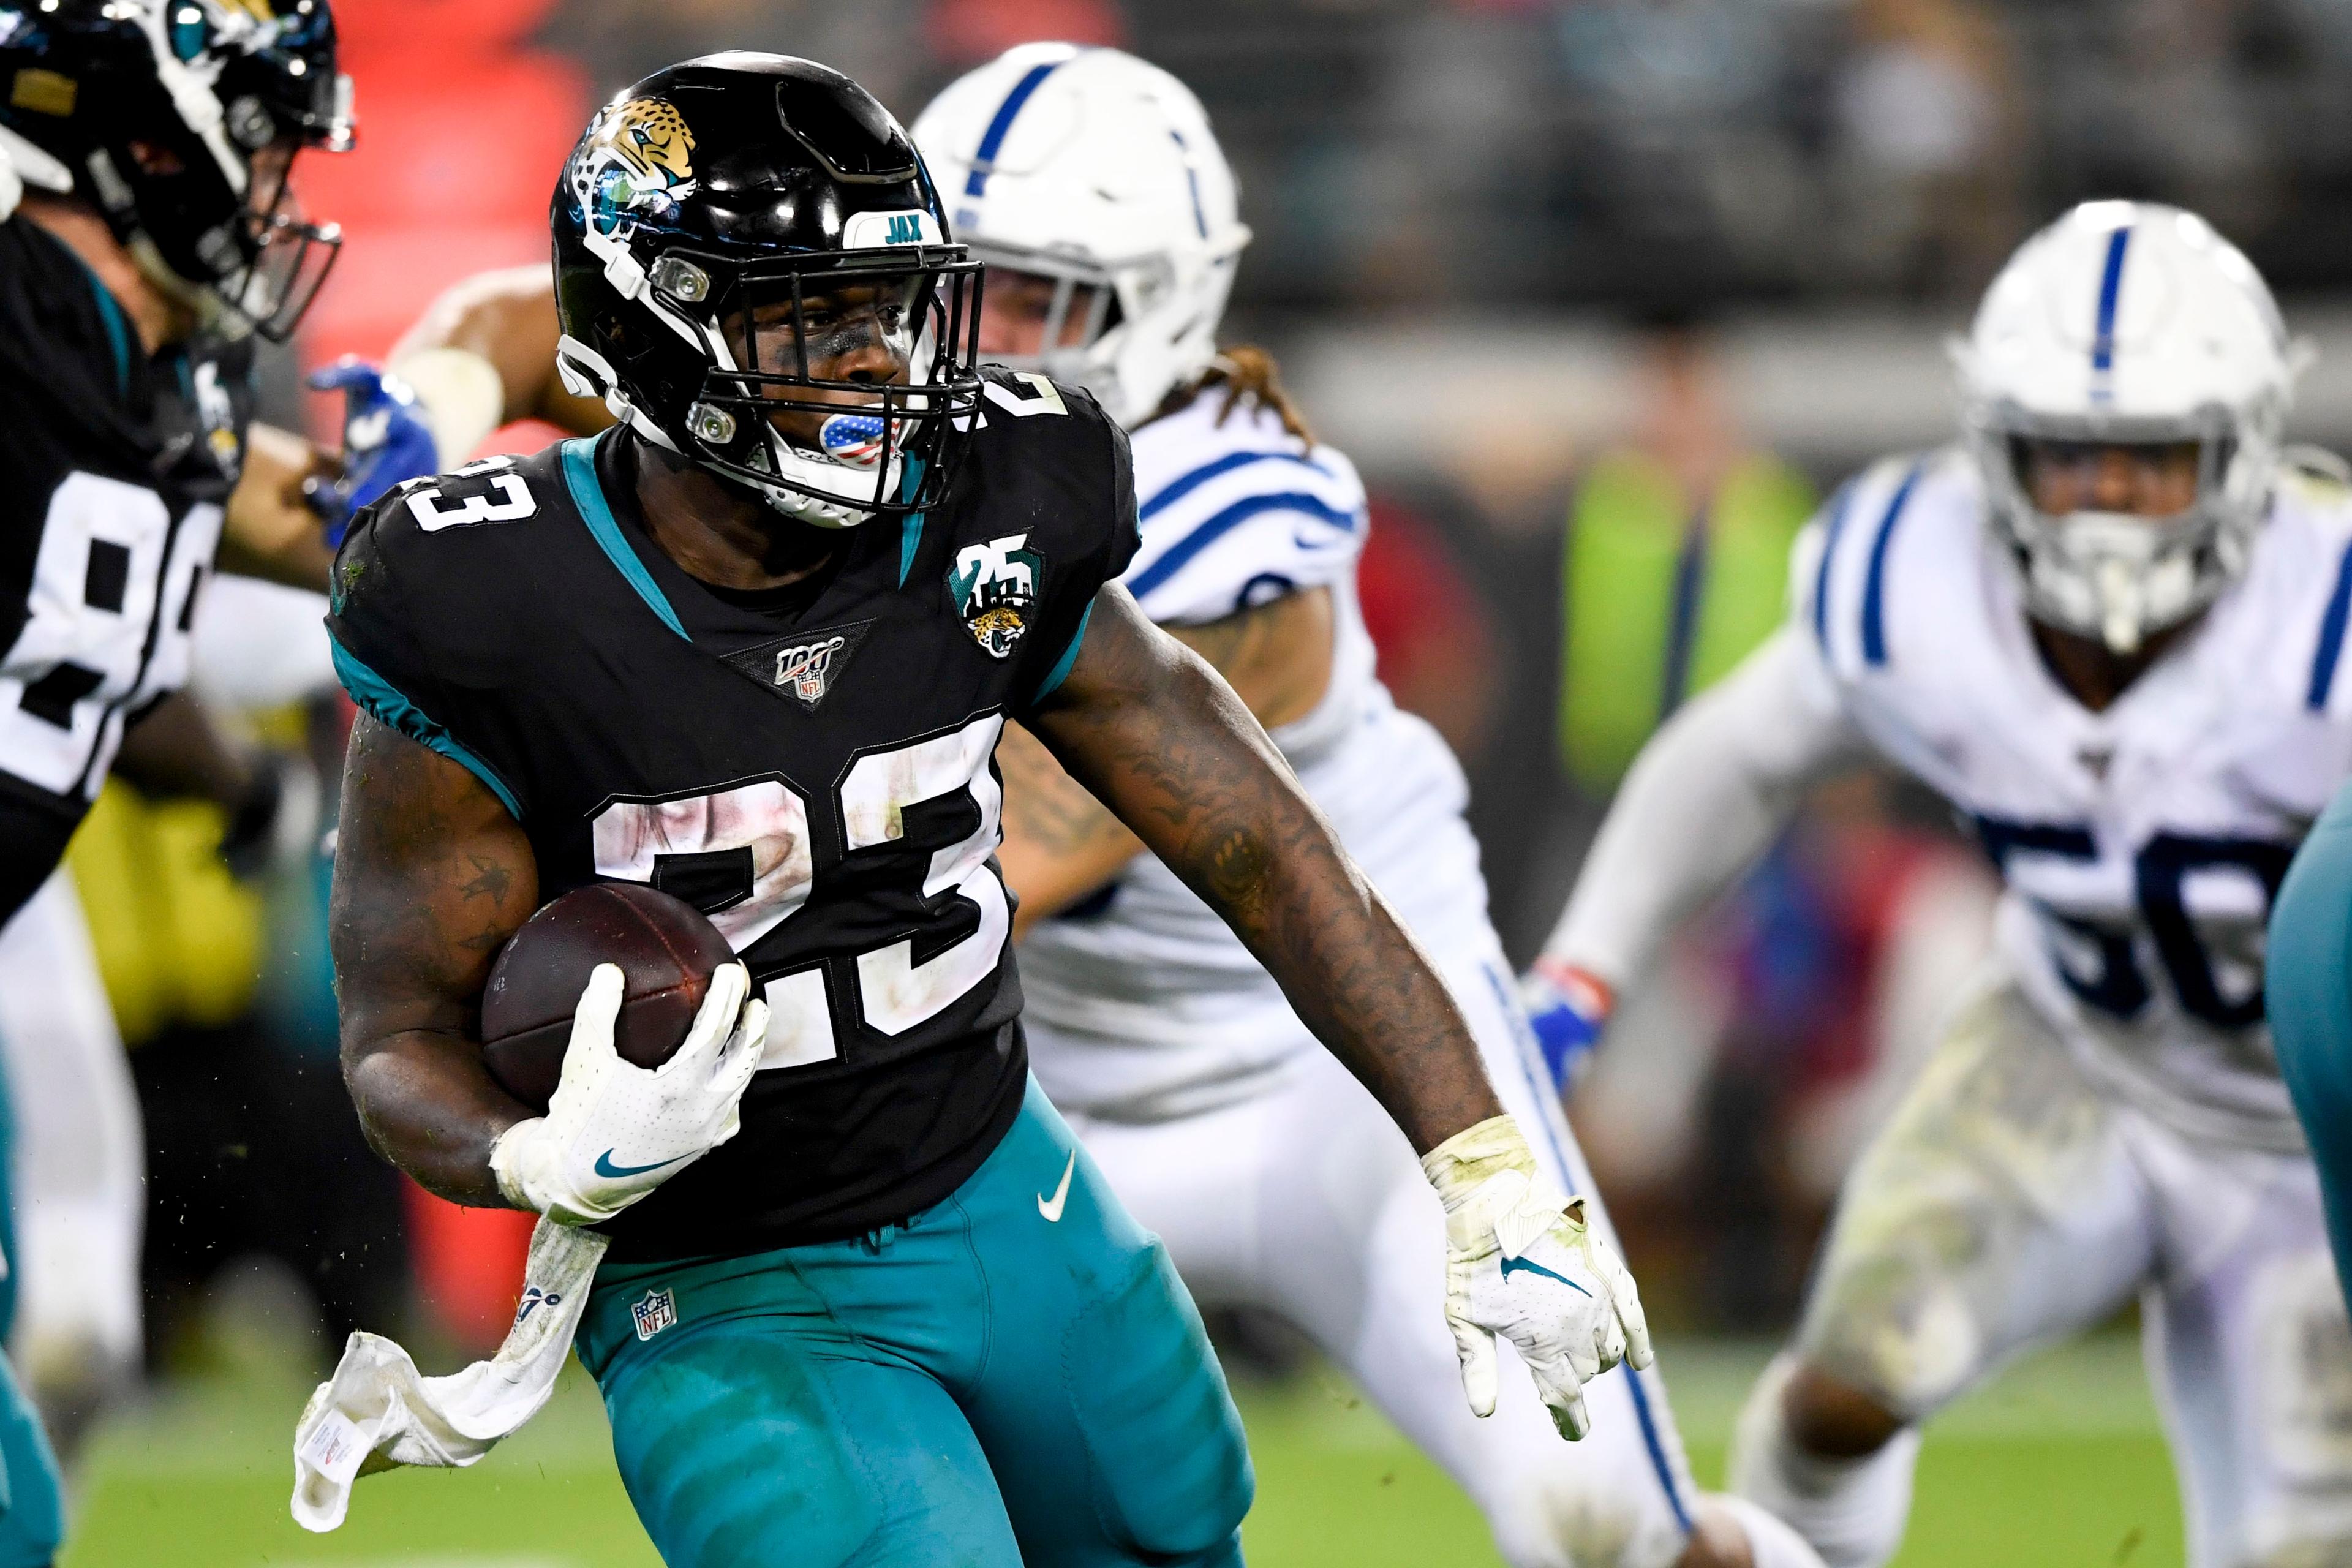 Dec 29, 2019; Jacksonville, Florida, USA; Jacksonville Jaguars running back Ryquell Armstead (23) runs with the ball during the fourth quarter against the Indianapolis Colts at TIAA Bank Field. Mandatory Credit: Douglas DeFelice-USA TODAY Sports / Douglas DeFelice-USA TODAY Sports